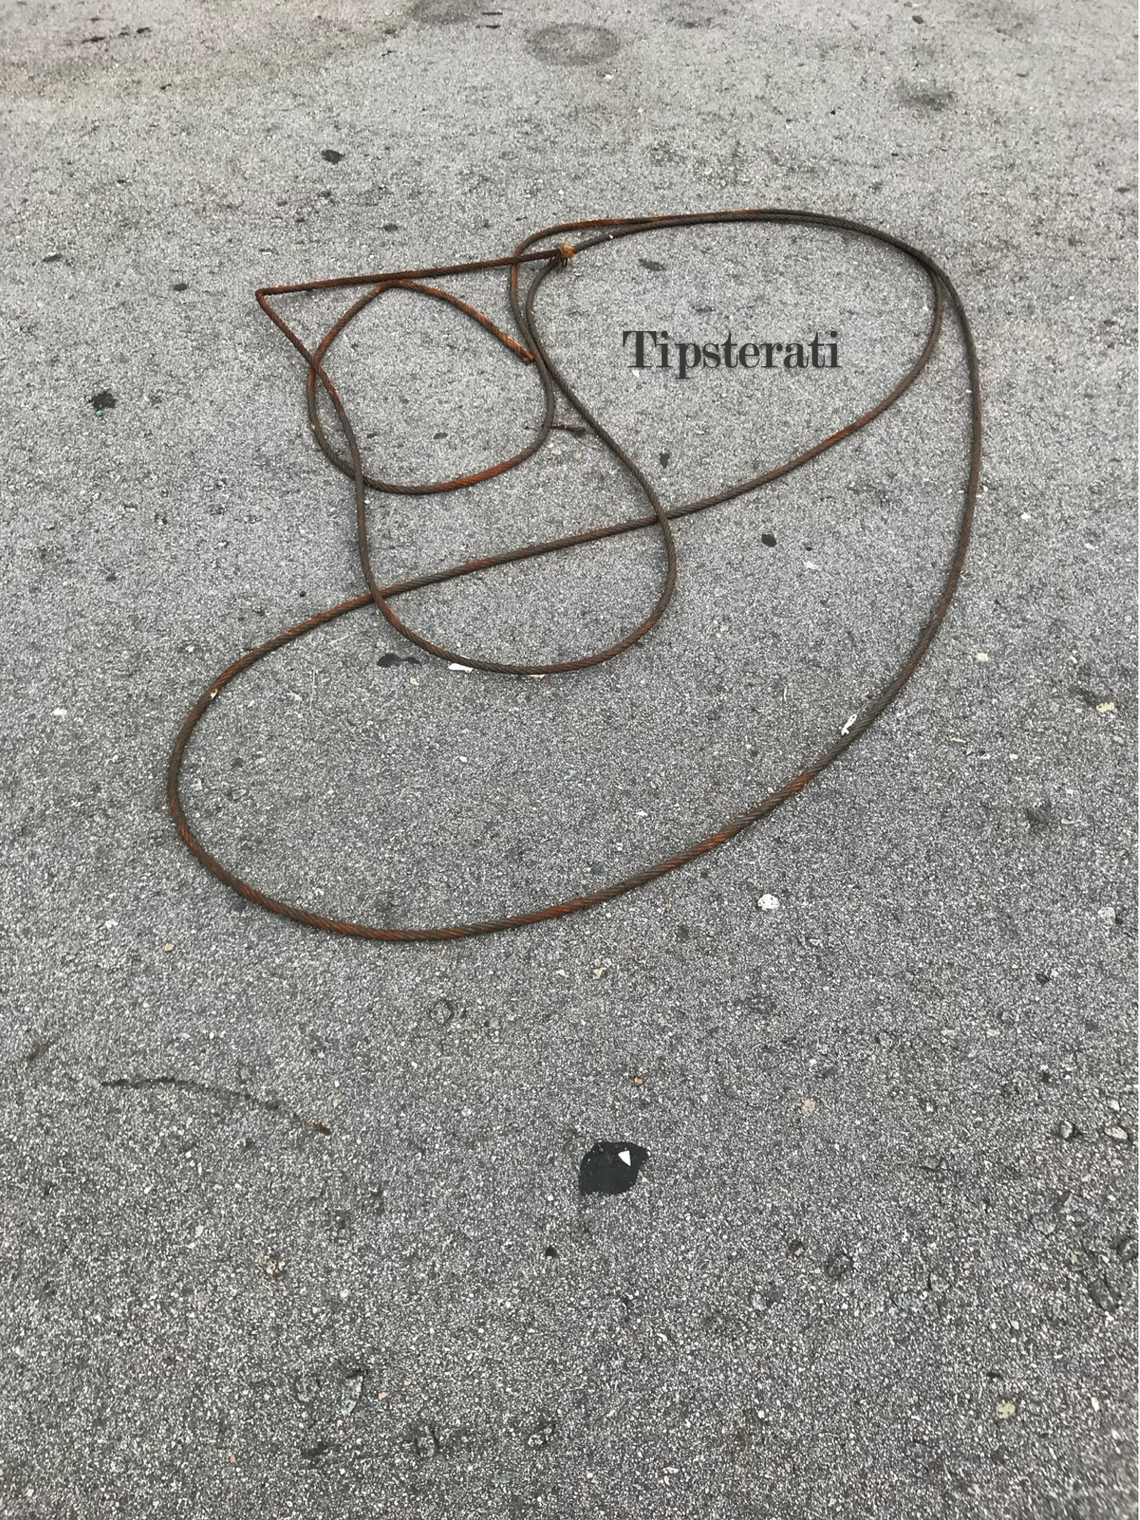 A thick piece of rusted wire forms a curvy, abstract shape on the ground